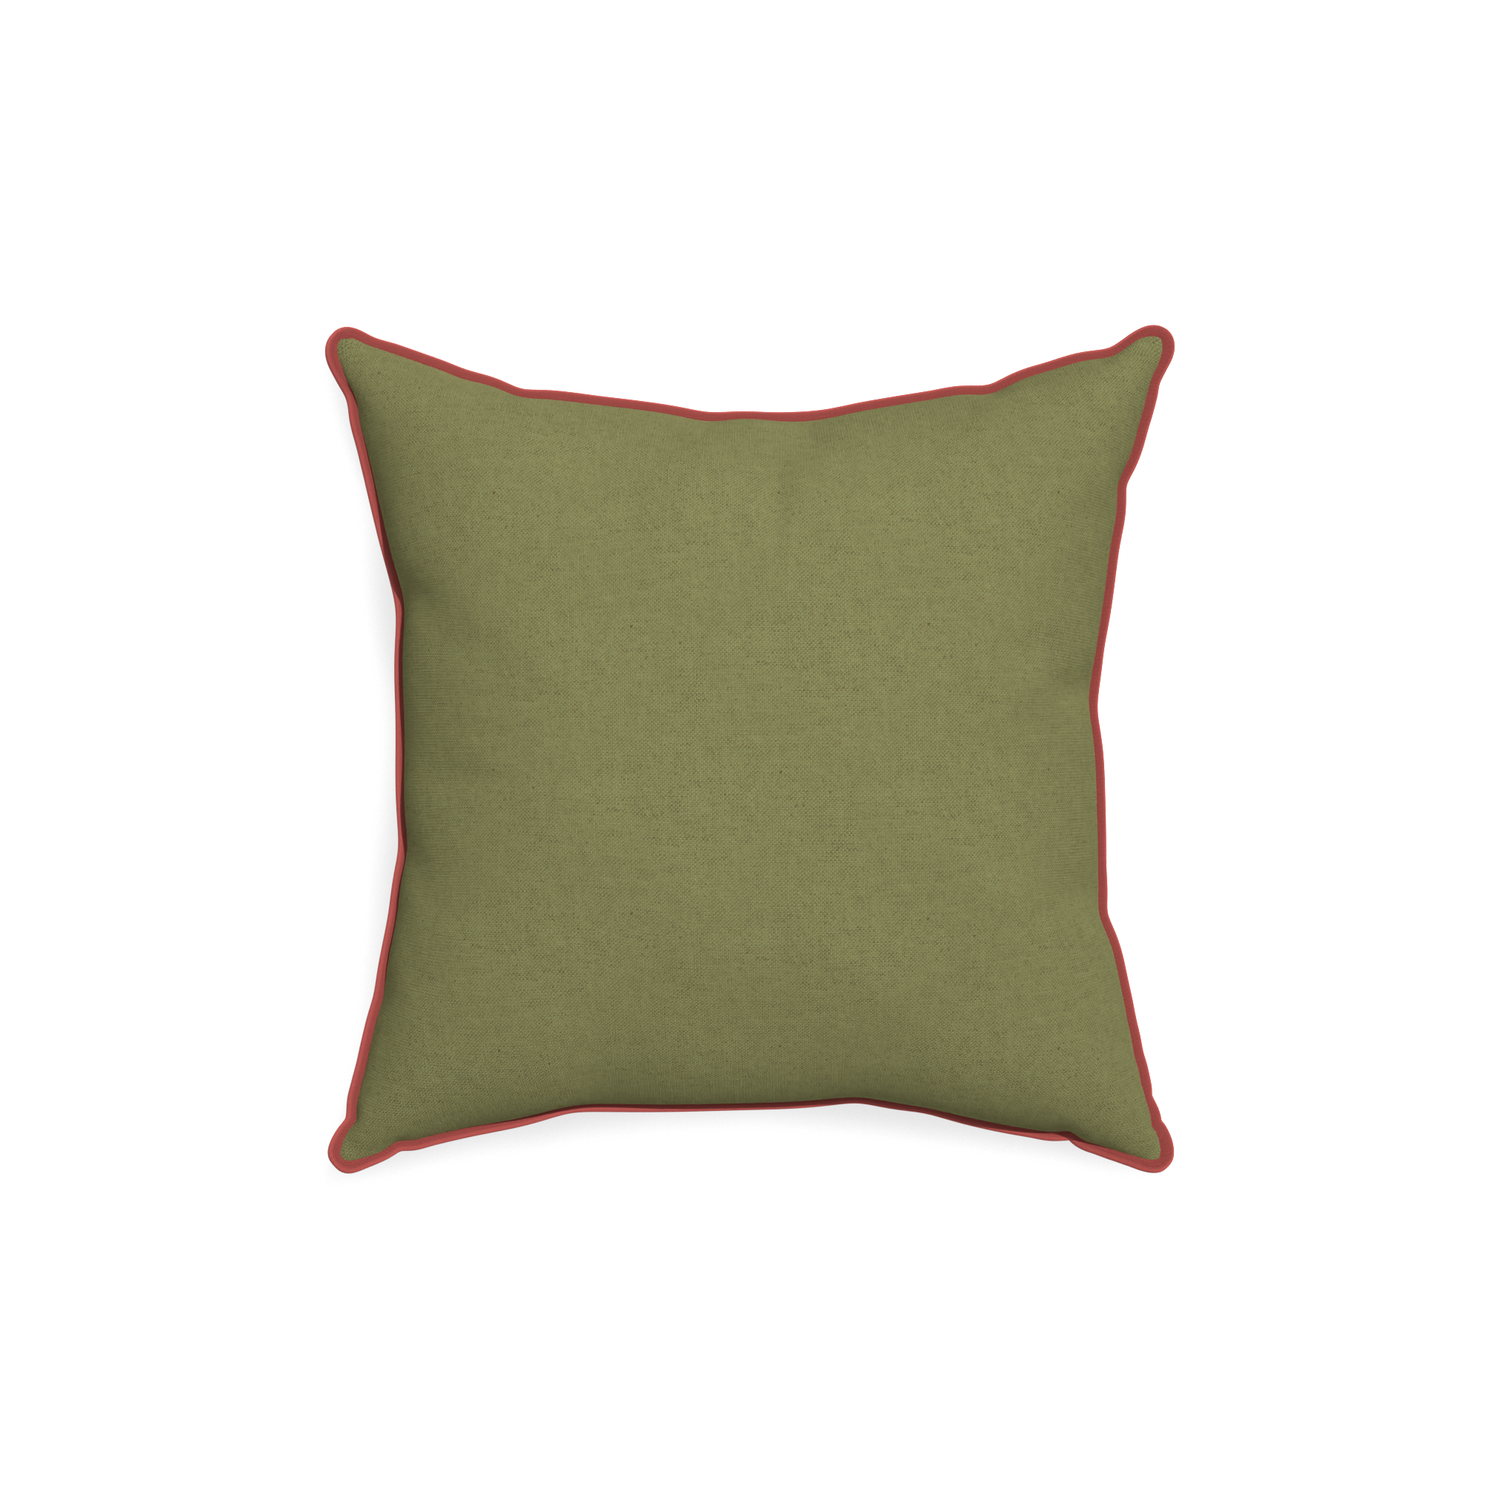 18-square moss custom moss greenpillow with c piping on white background